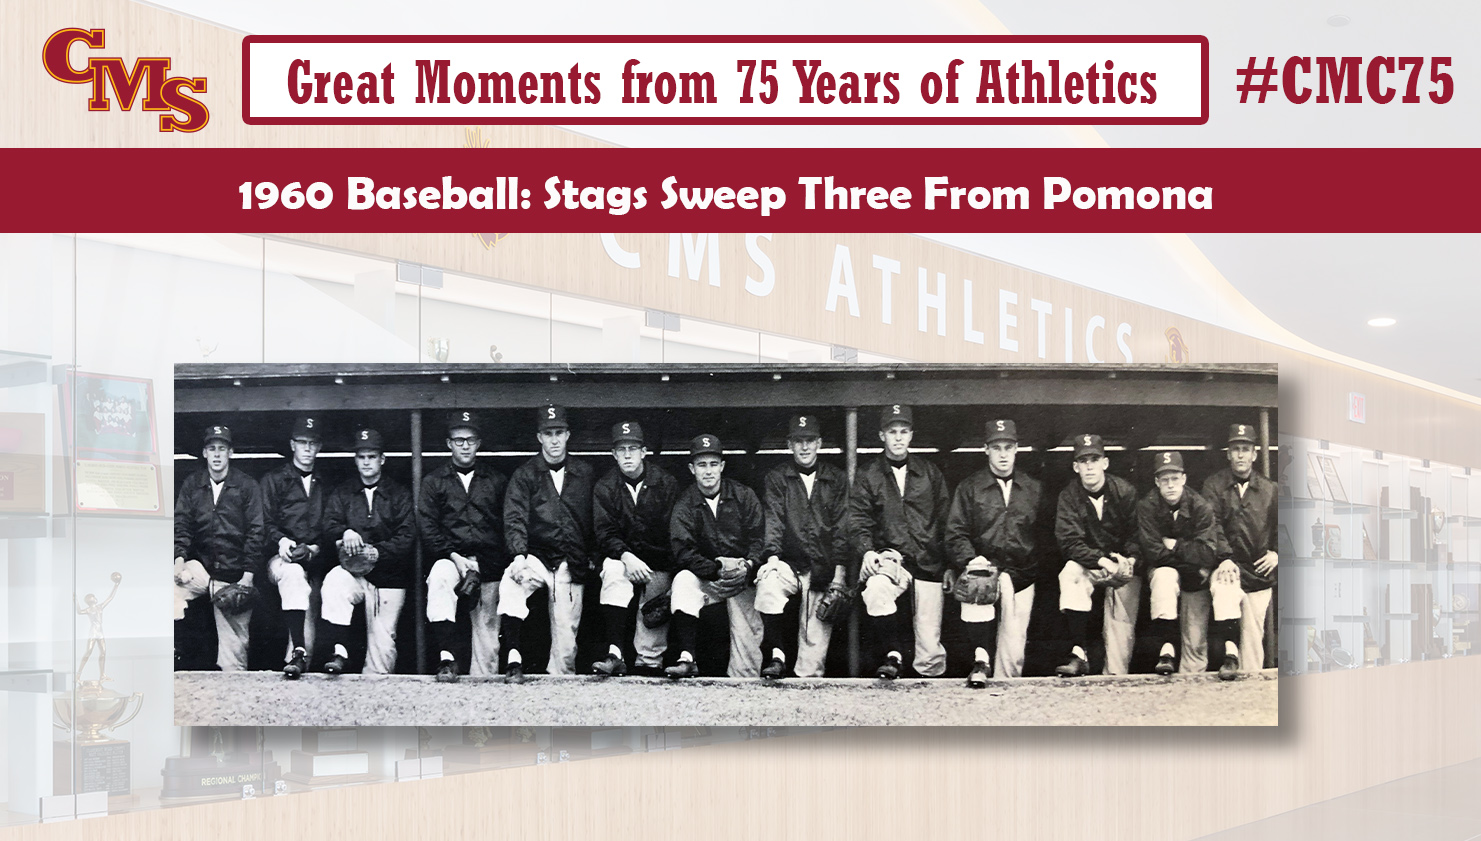 The 1960 Baseball Team poses for a team shot. Words over the photo read: Great Moments from 75 Years of Atthetics: 1960 Baseball: Stags Sweep Three From Pomona.